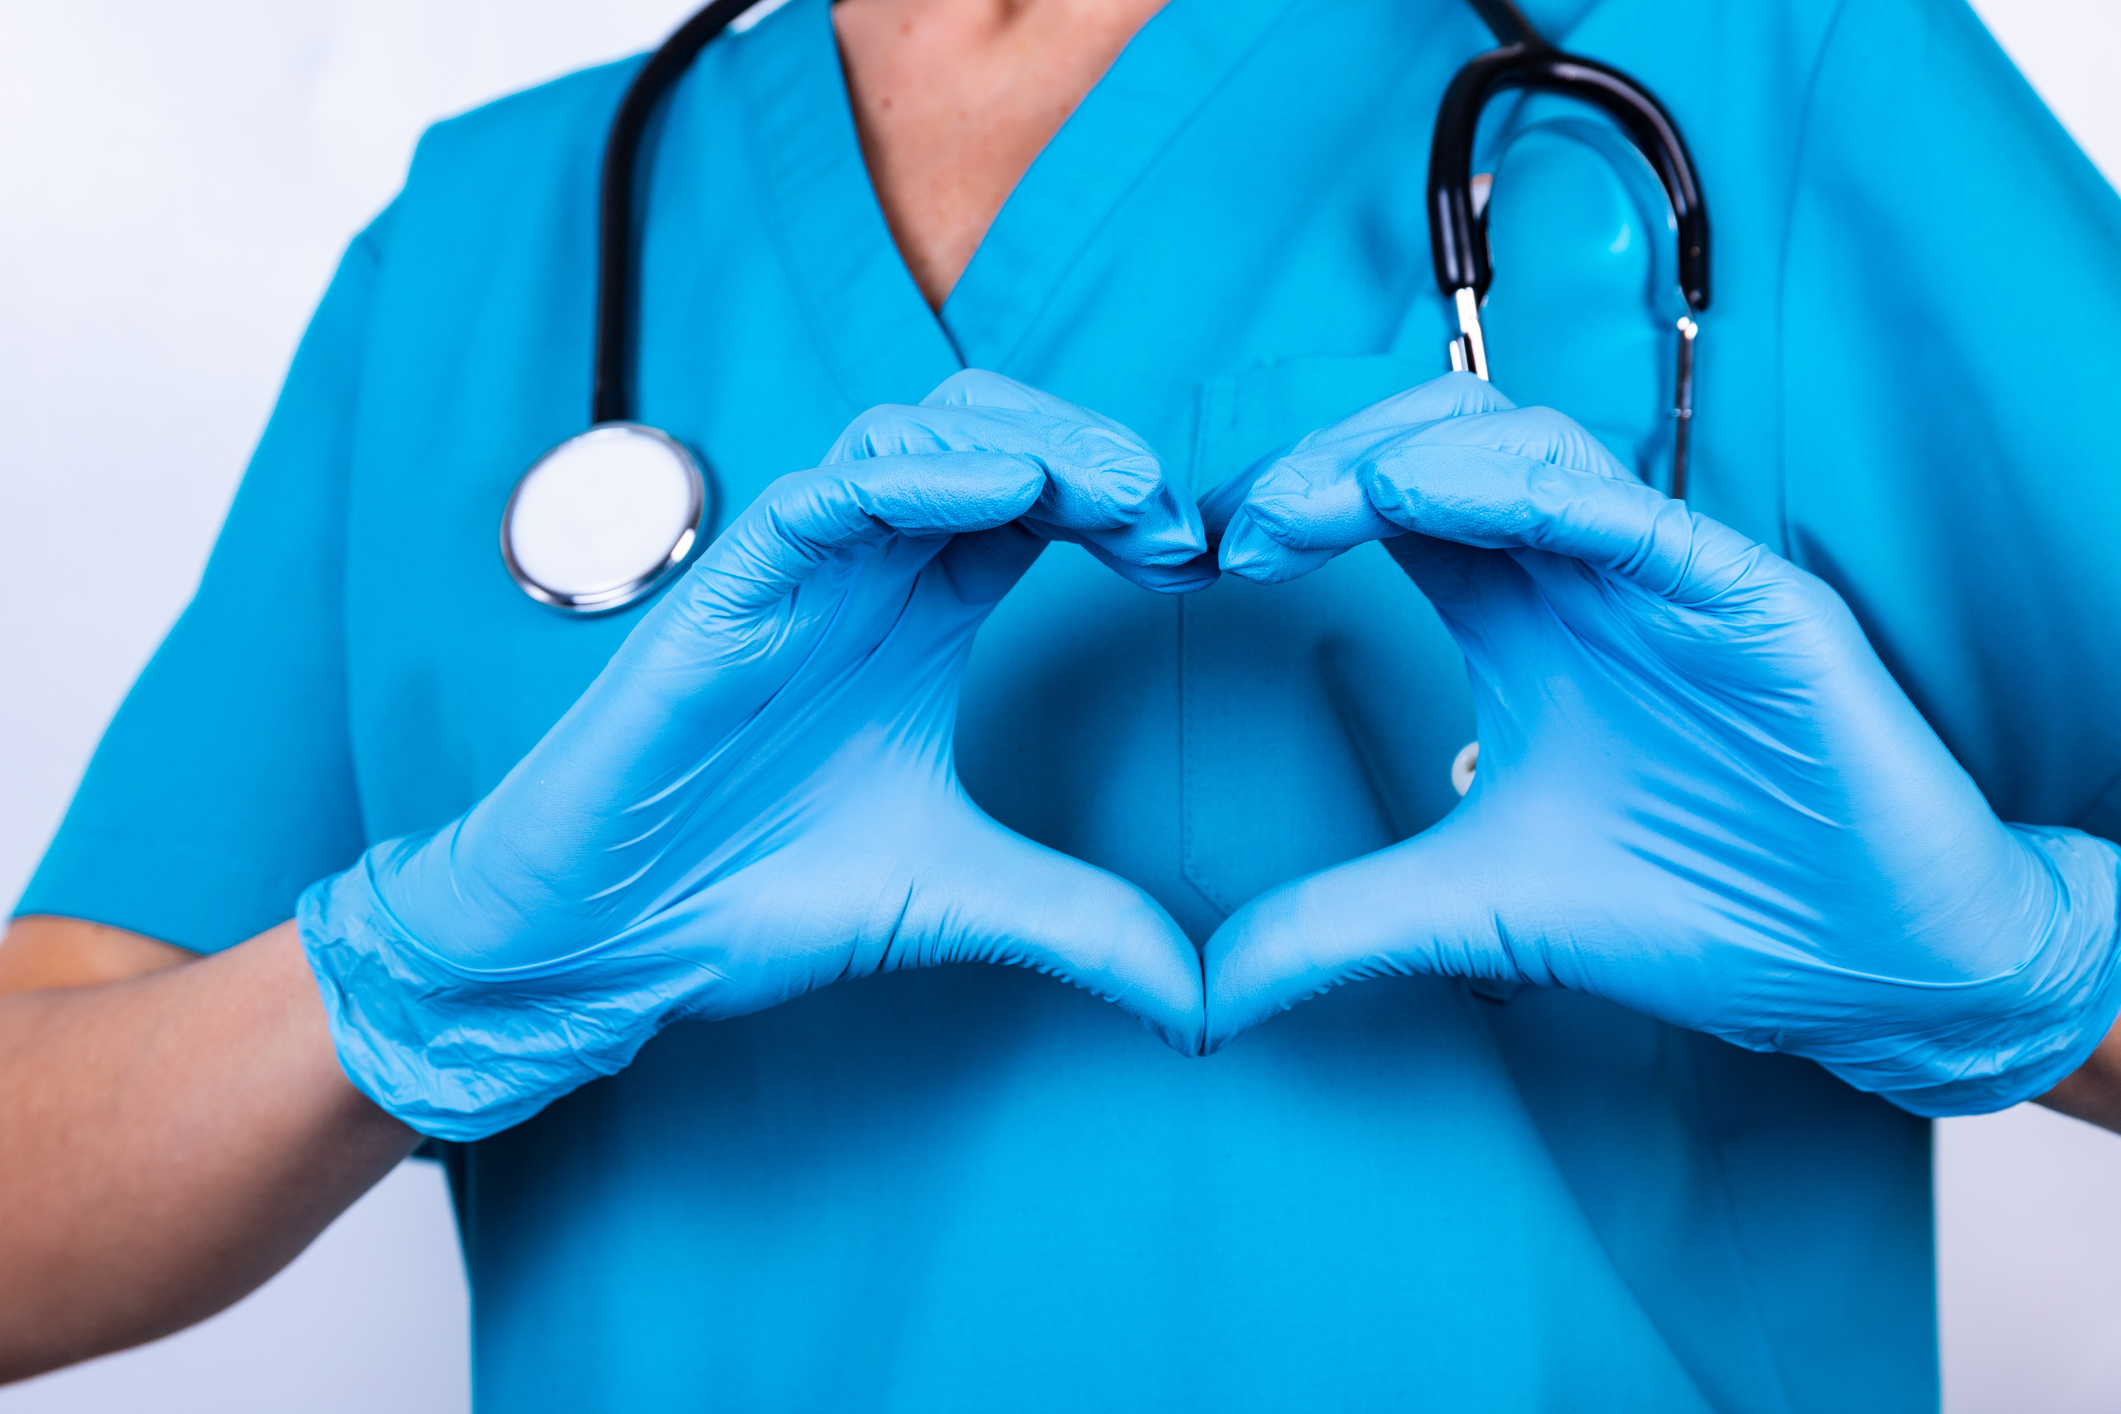 A doctor wearing hospital scrubs and a stethoscope forms a heart shape with their gloved hands over their heart.